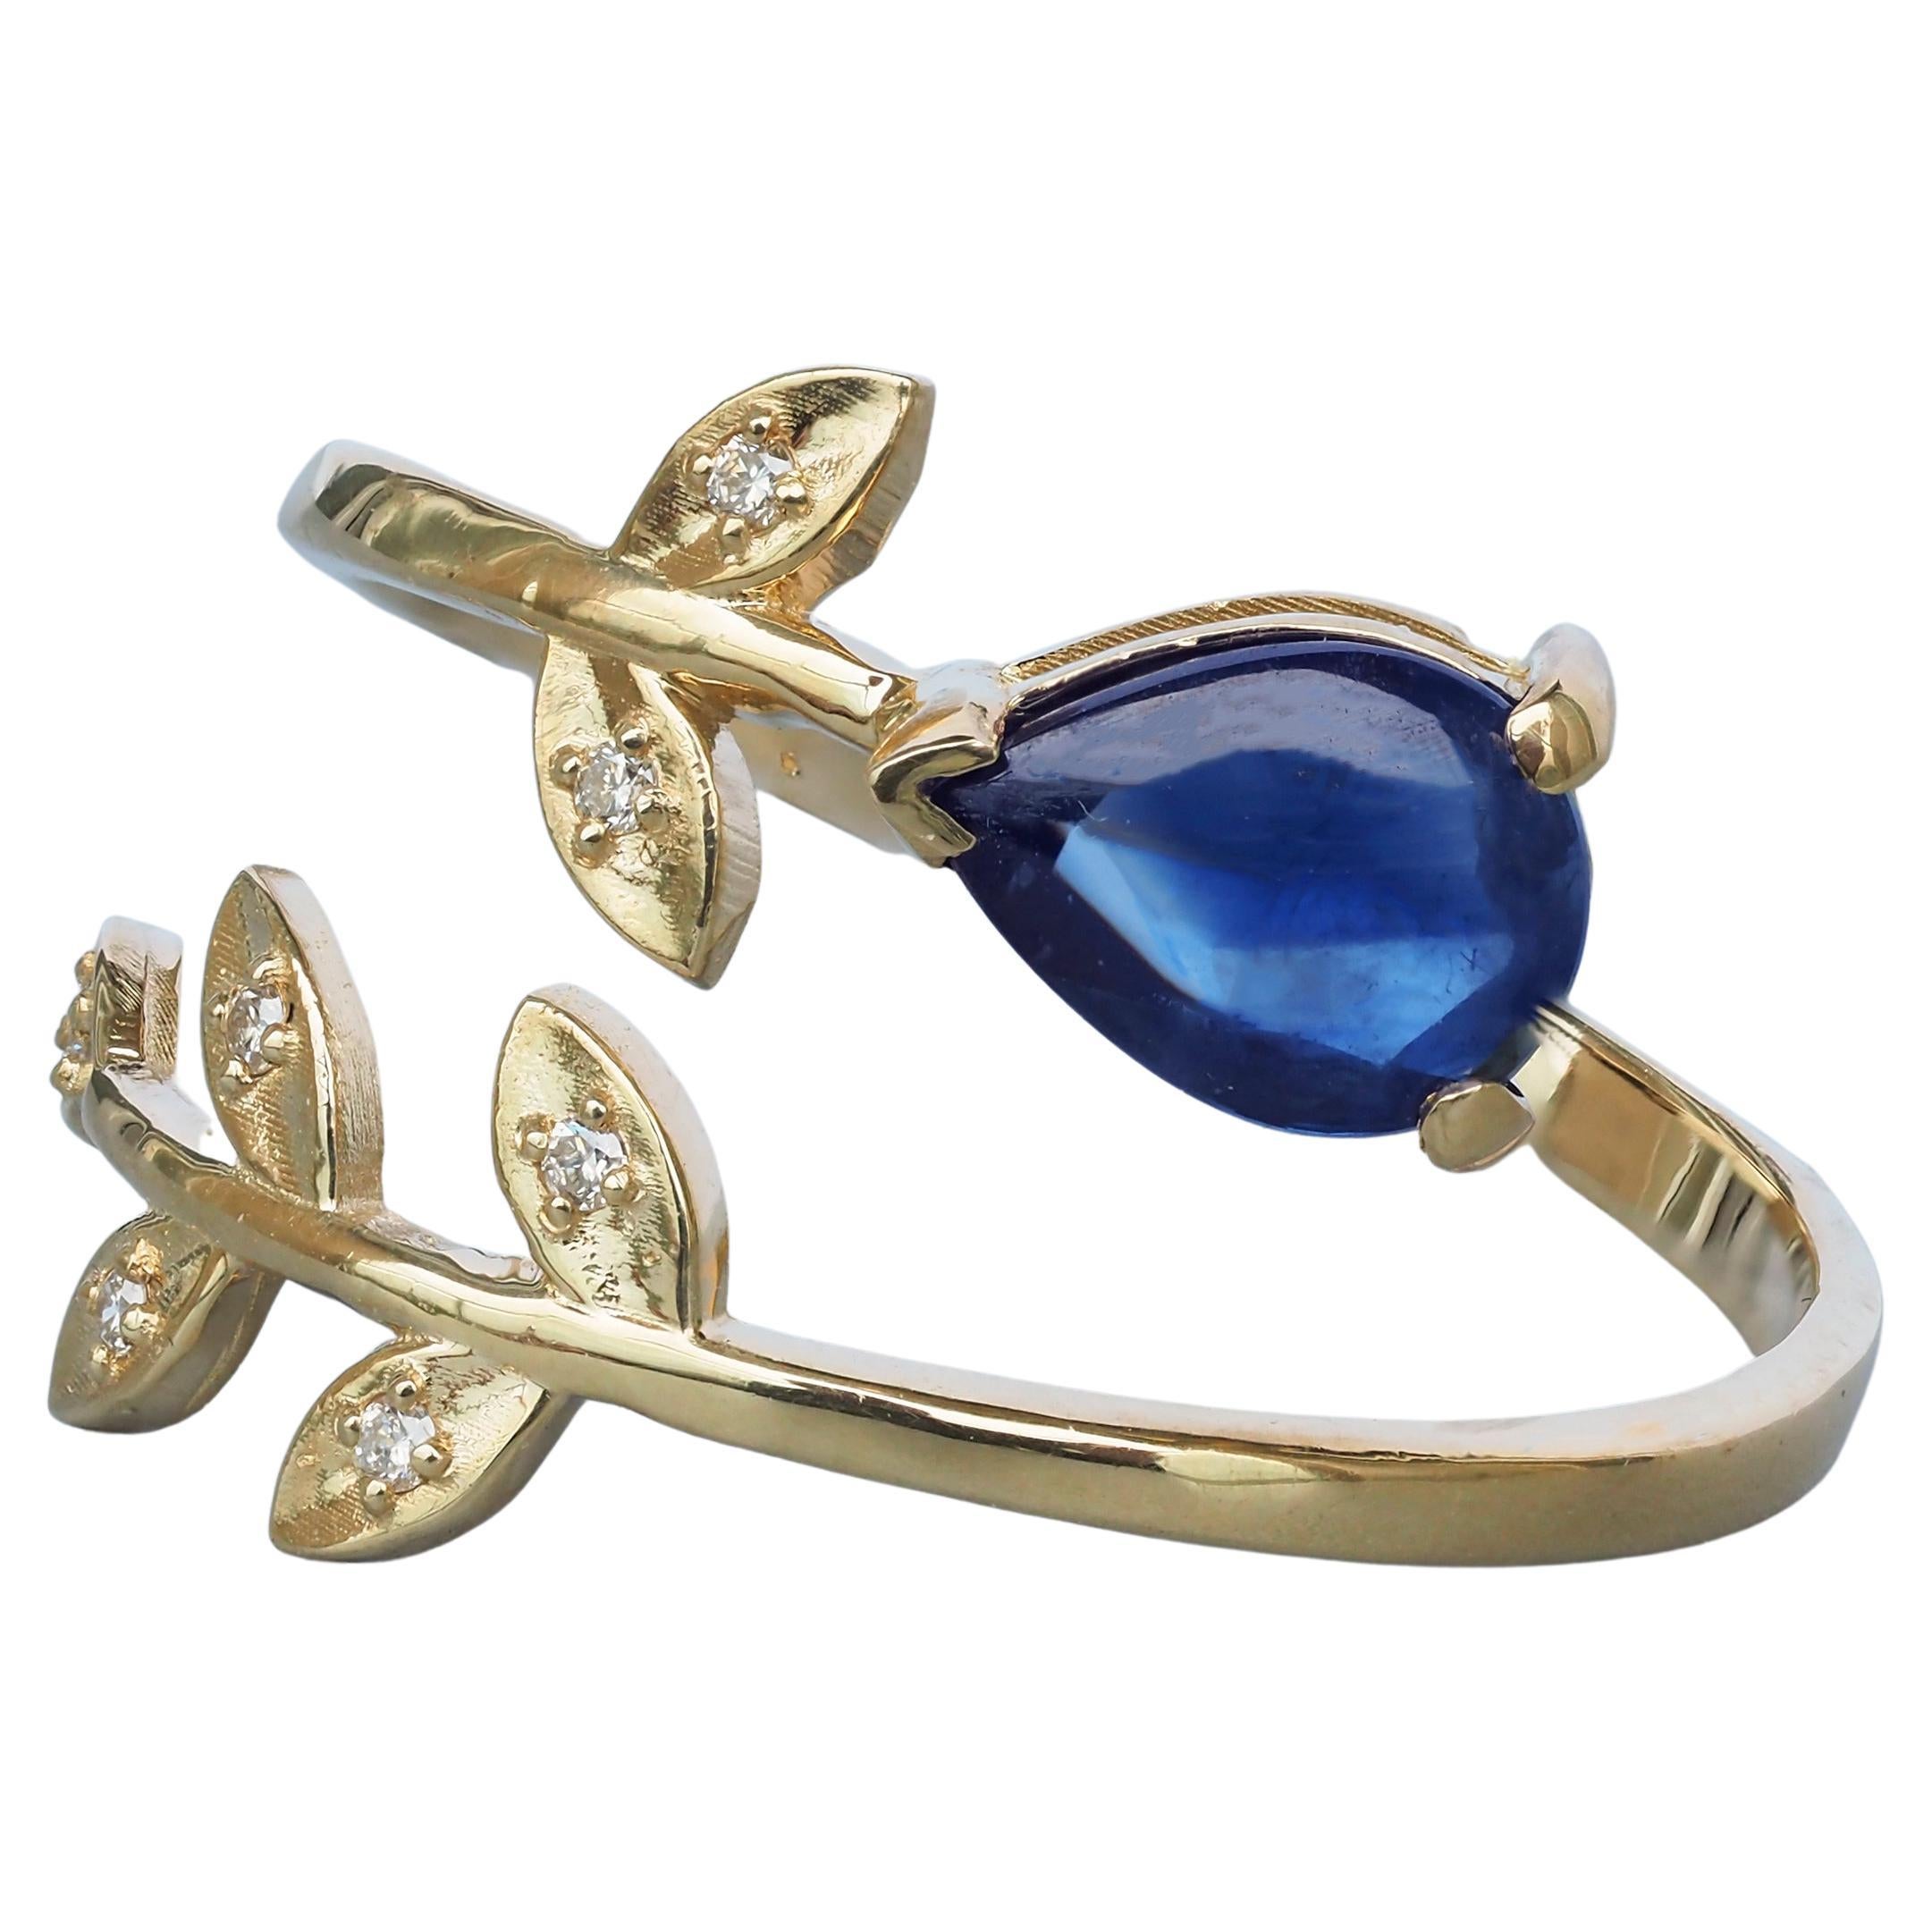 For Sale:  14k Solid Gold "Floral" Ring with Natural Sapphire and Diamonds